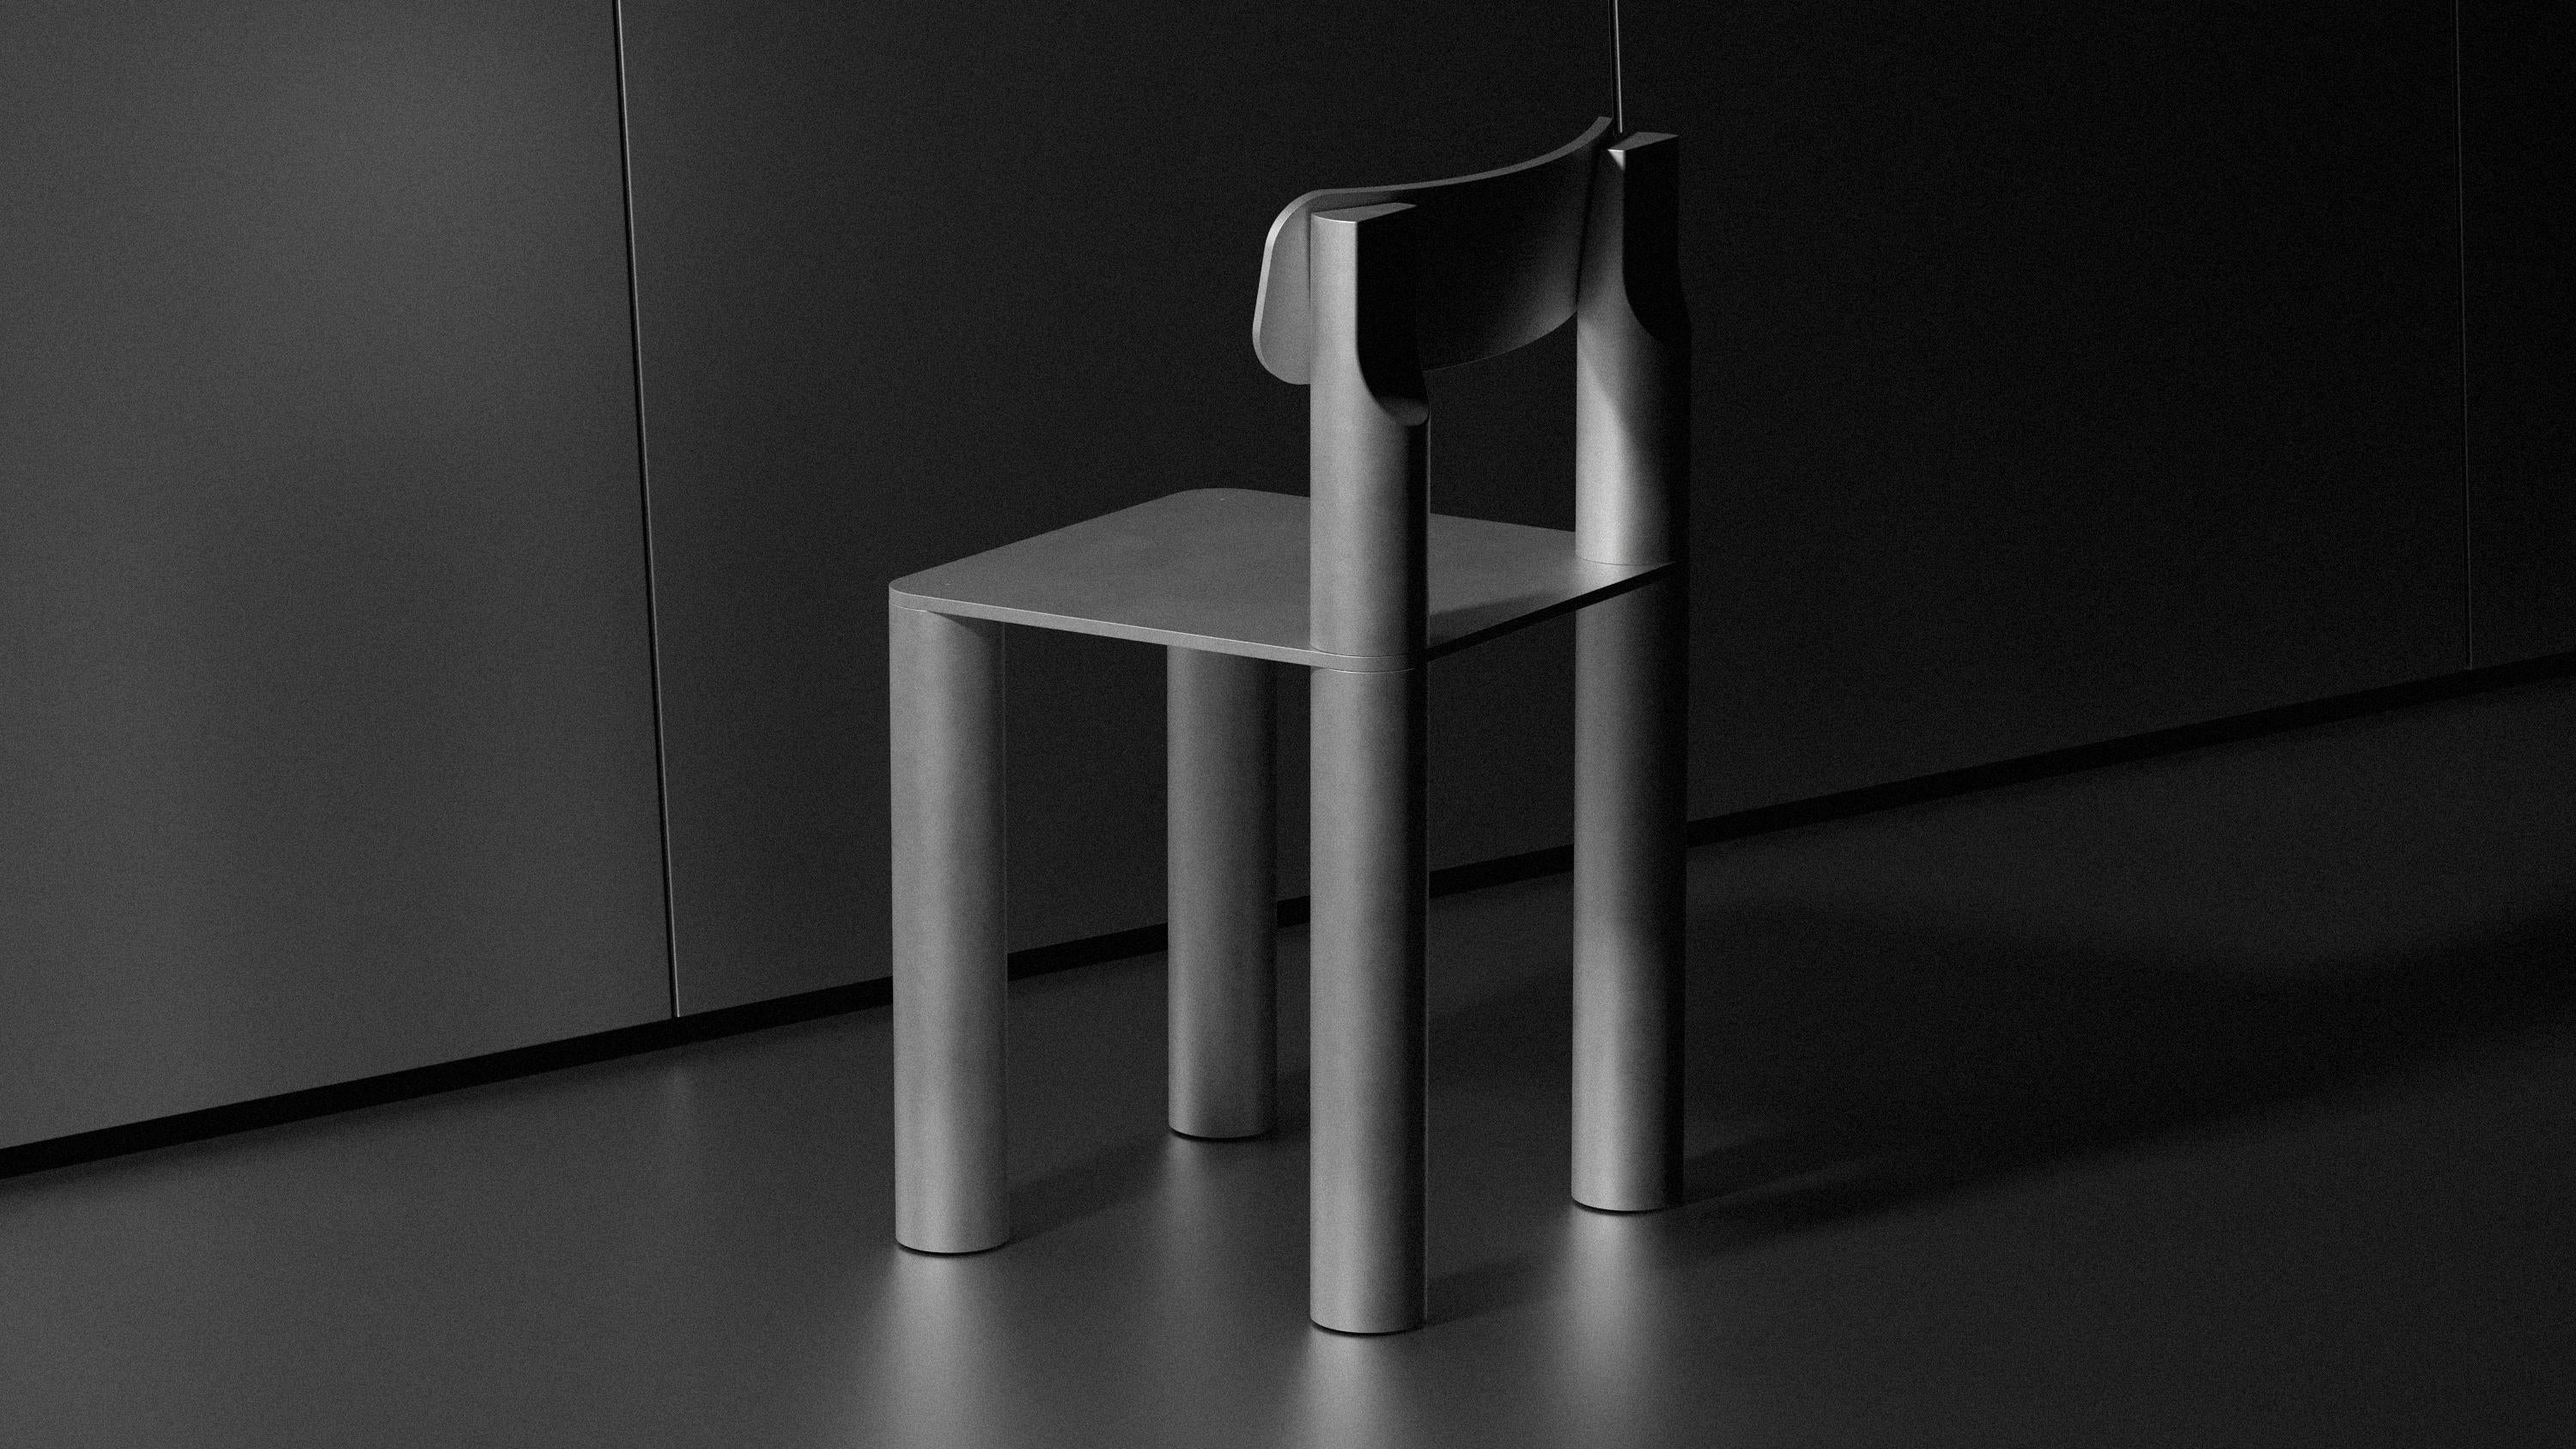 Flagship product of the aluminum collection, the SILO chair reconciles functionality and geometric exploration. It combines straight lines and curves, magnifying the aluminum that composes it by exploiting its full depth. When held, the SILO gives